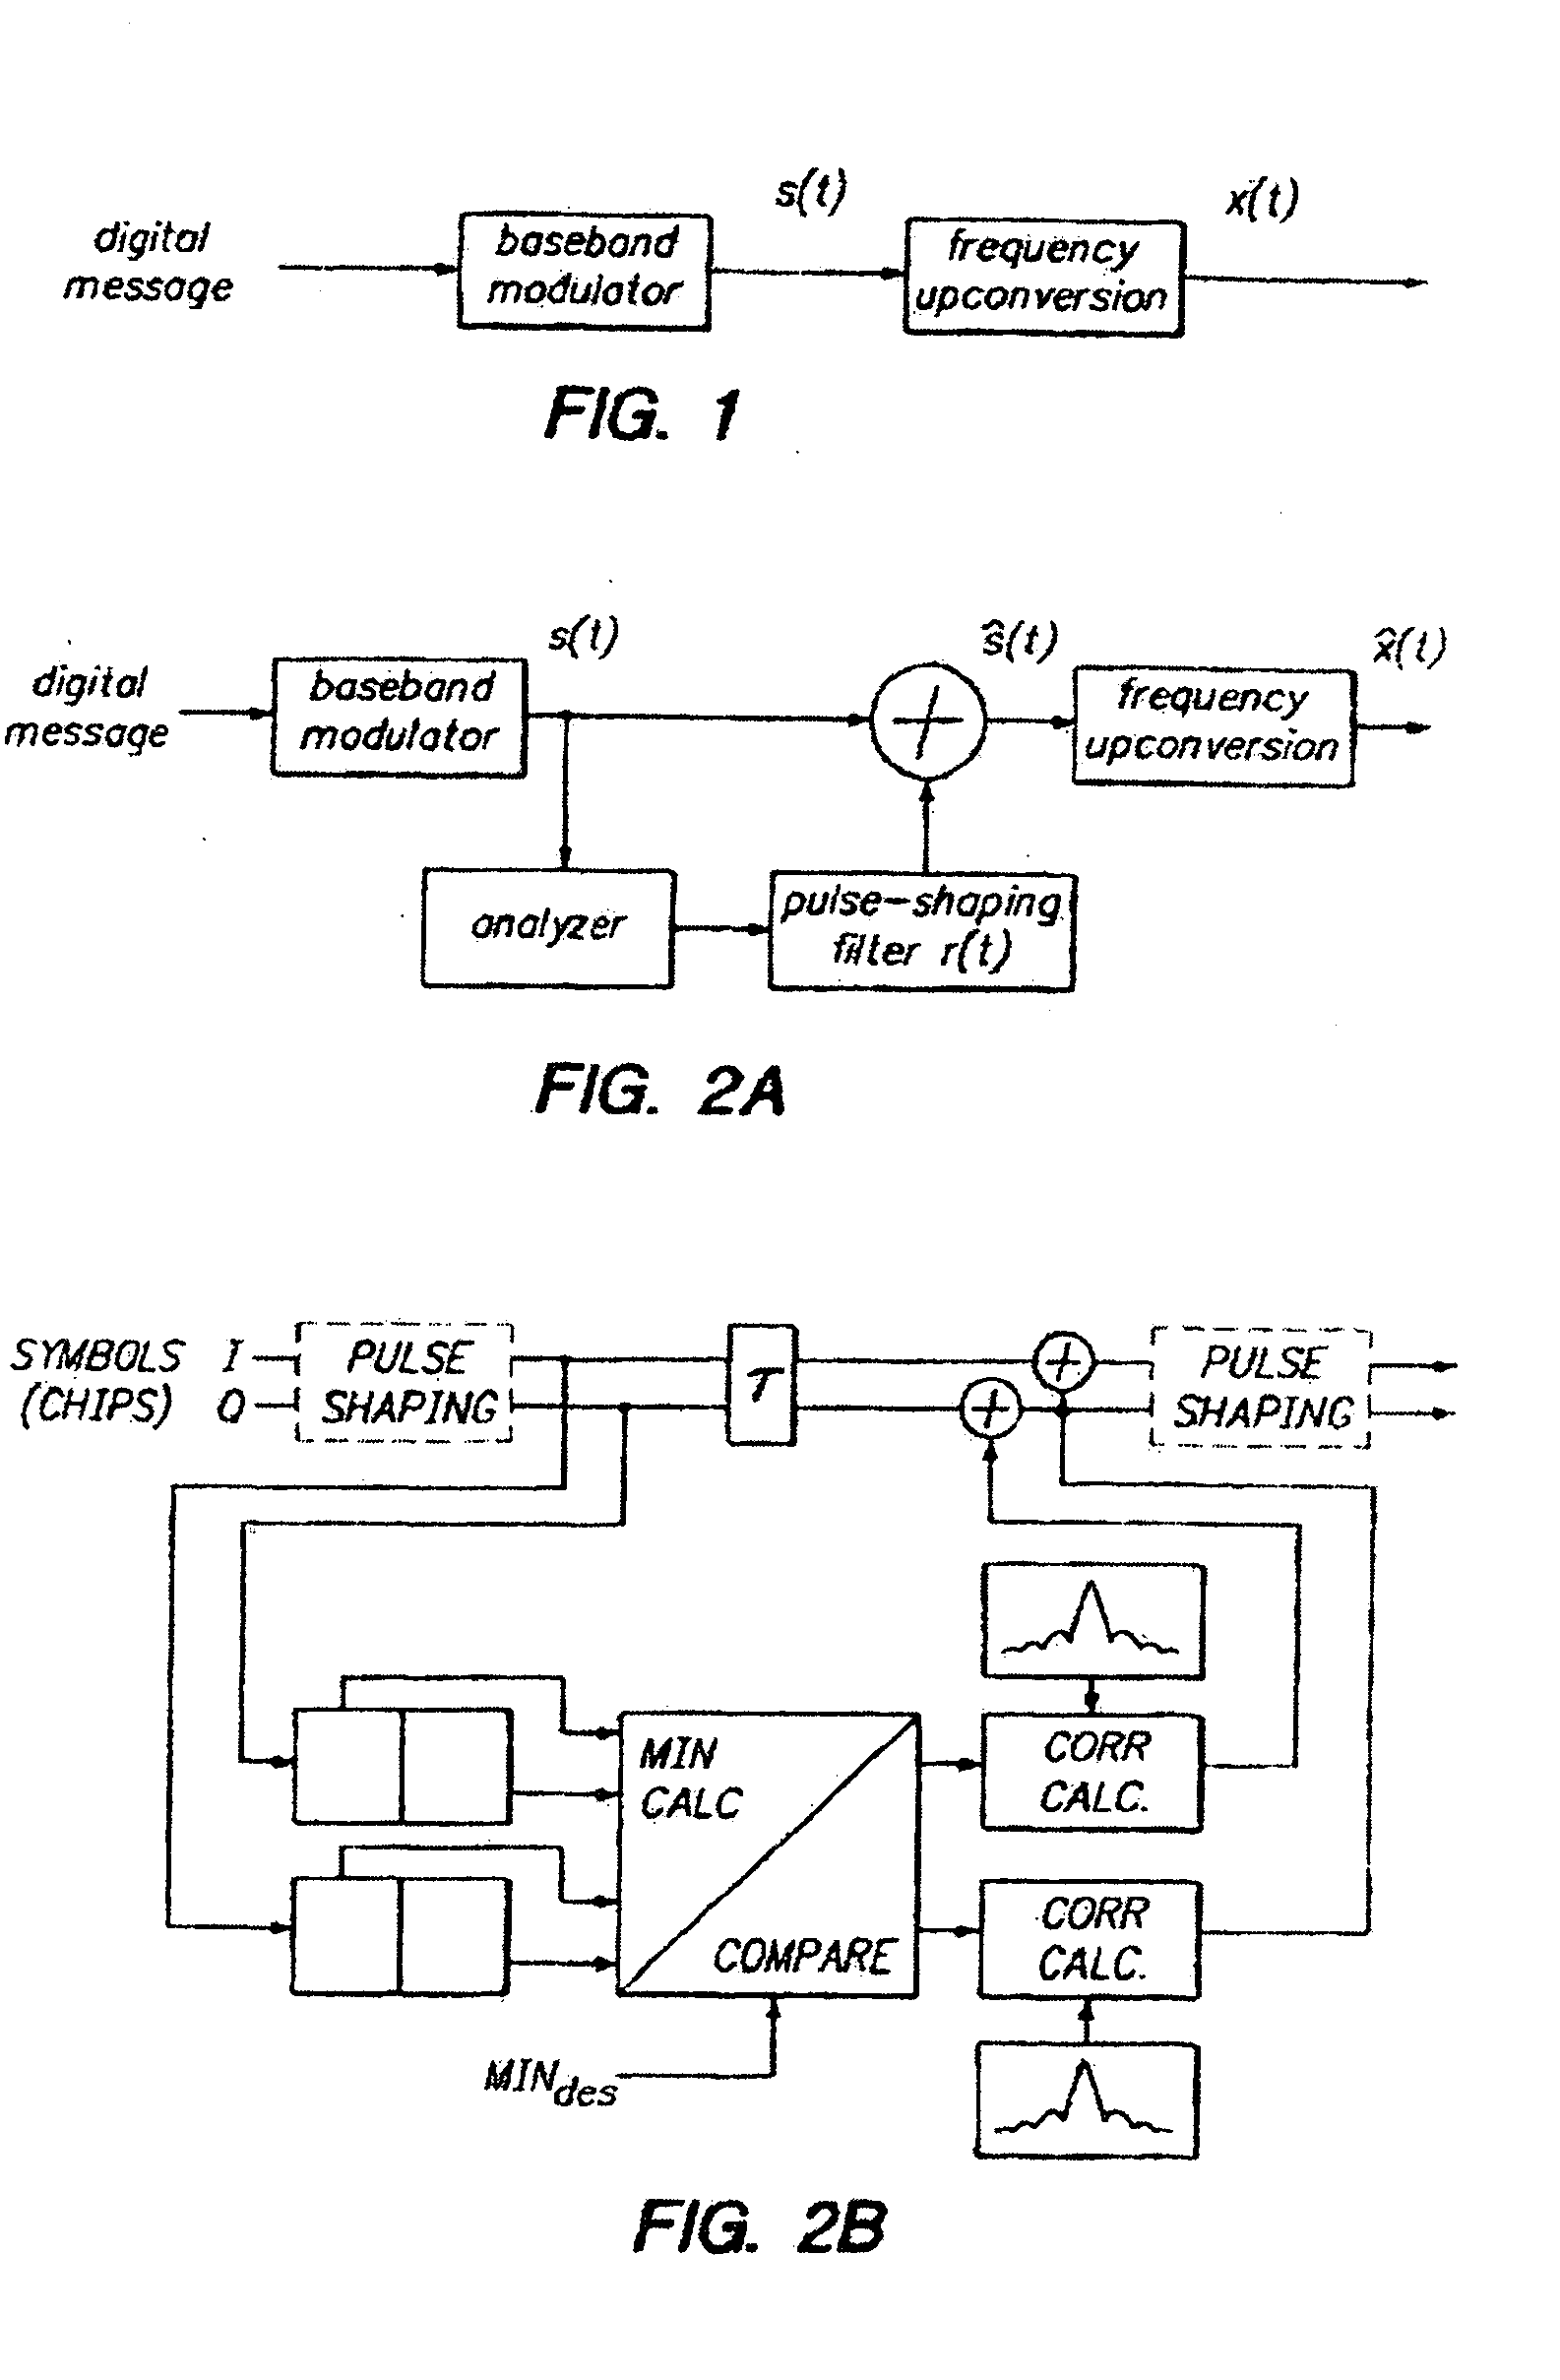 Methods and apparatus for conditioning communications signals based on detection of high-frequency events in polar domain